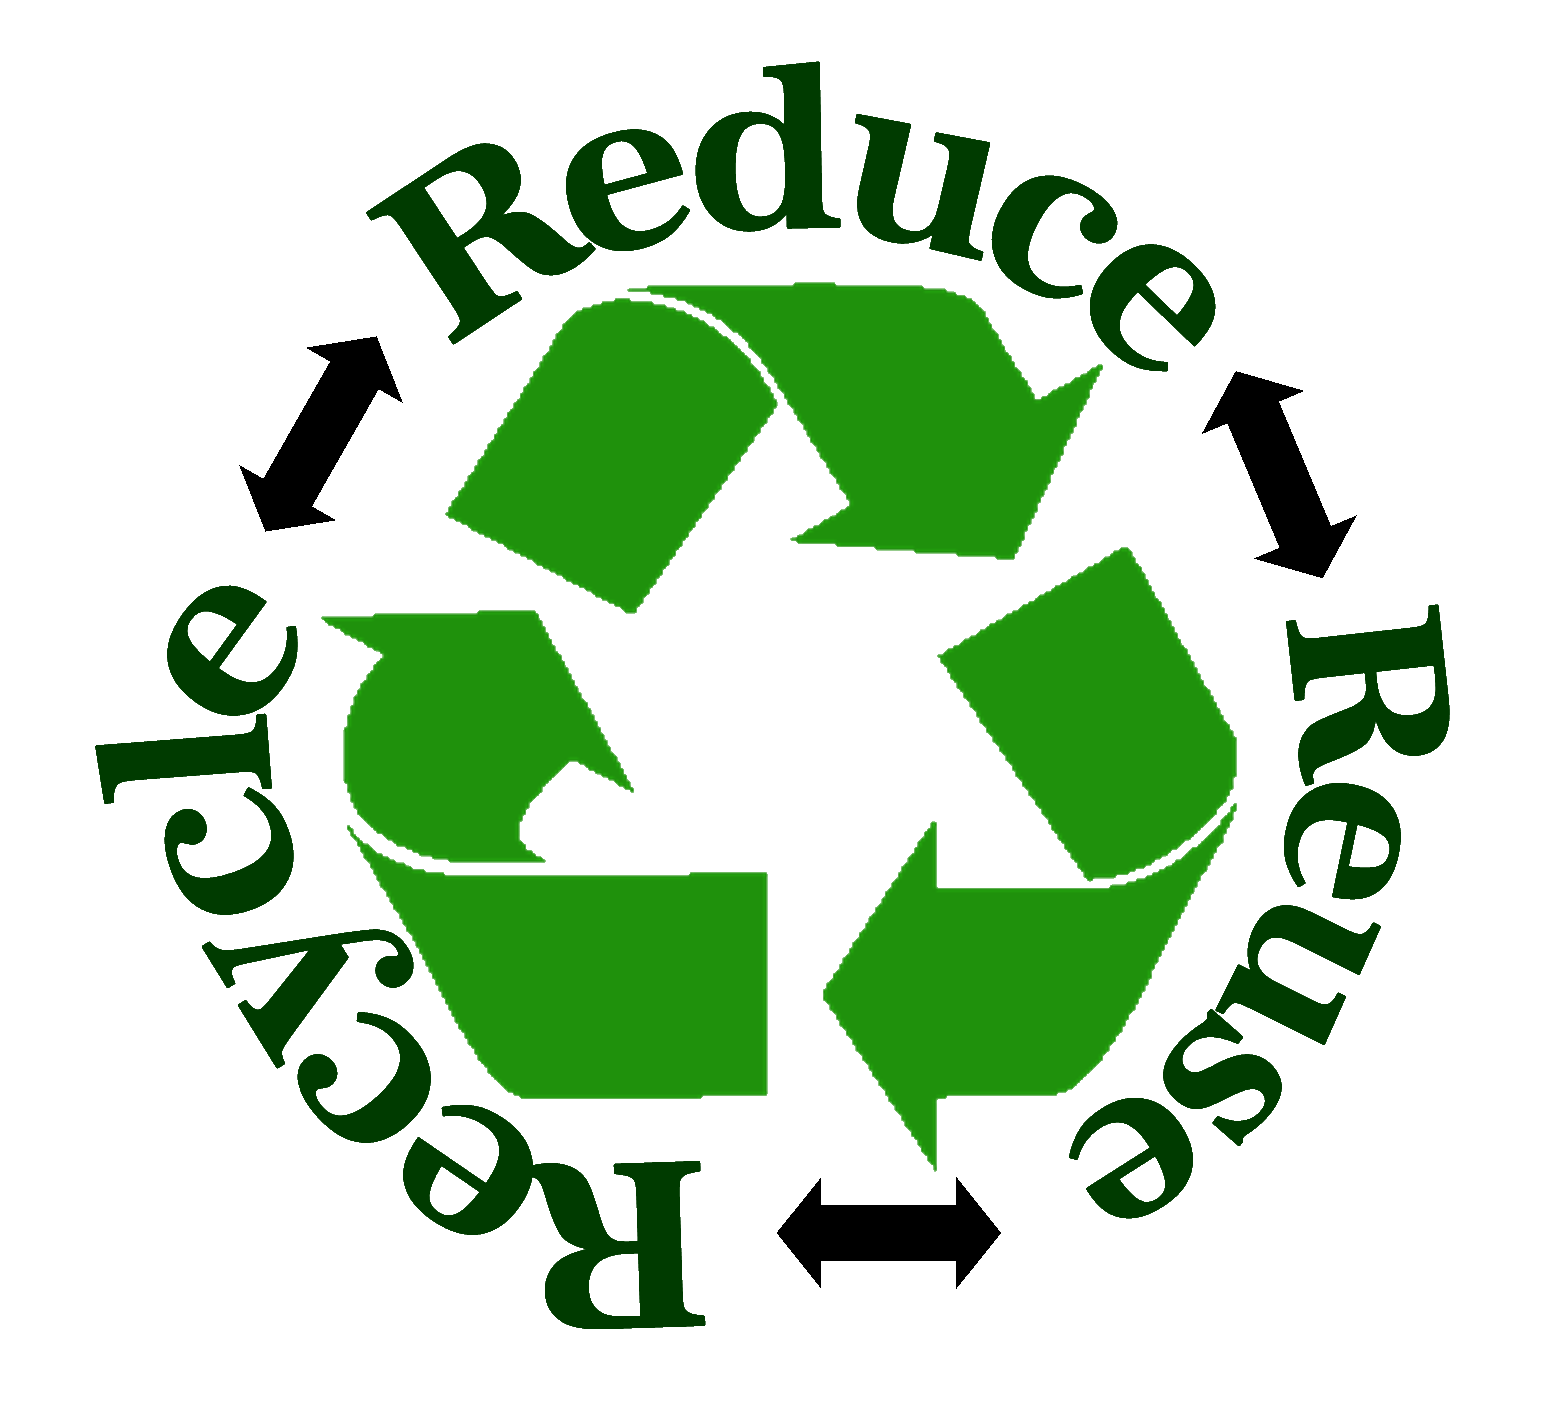 Pictures Of Recycling Signs - ClipArt Best